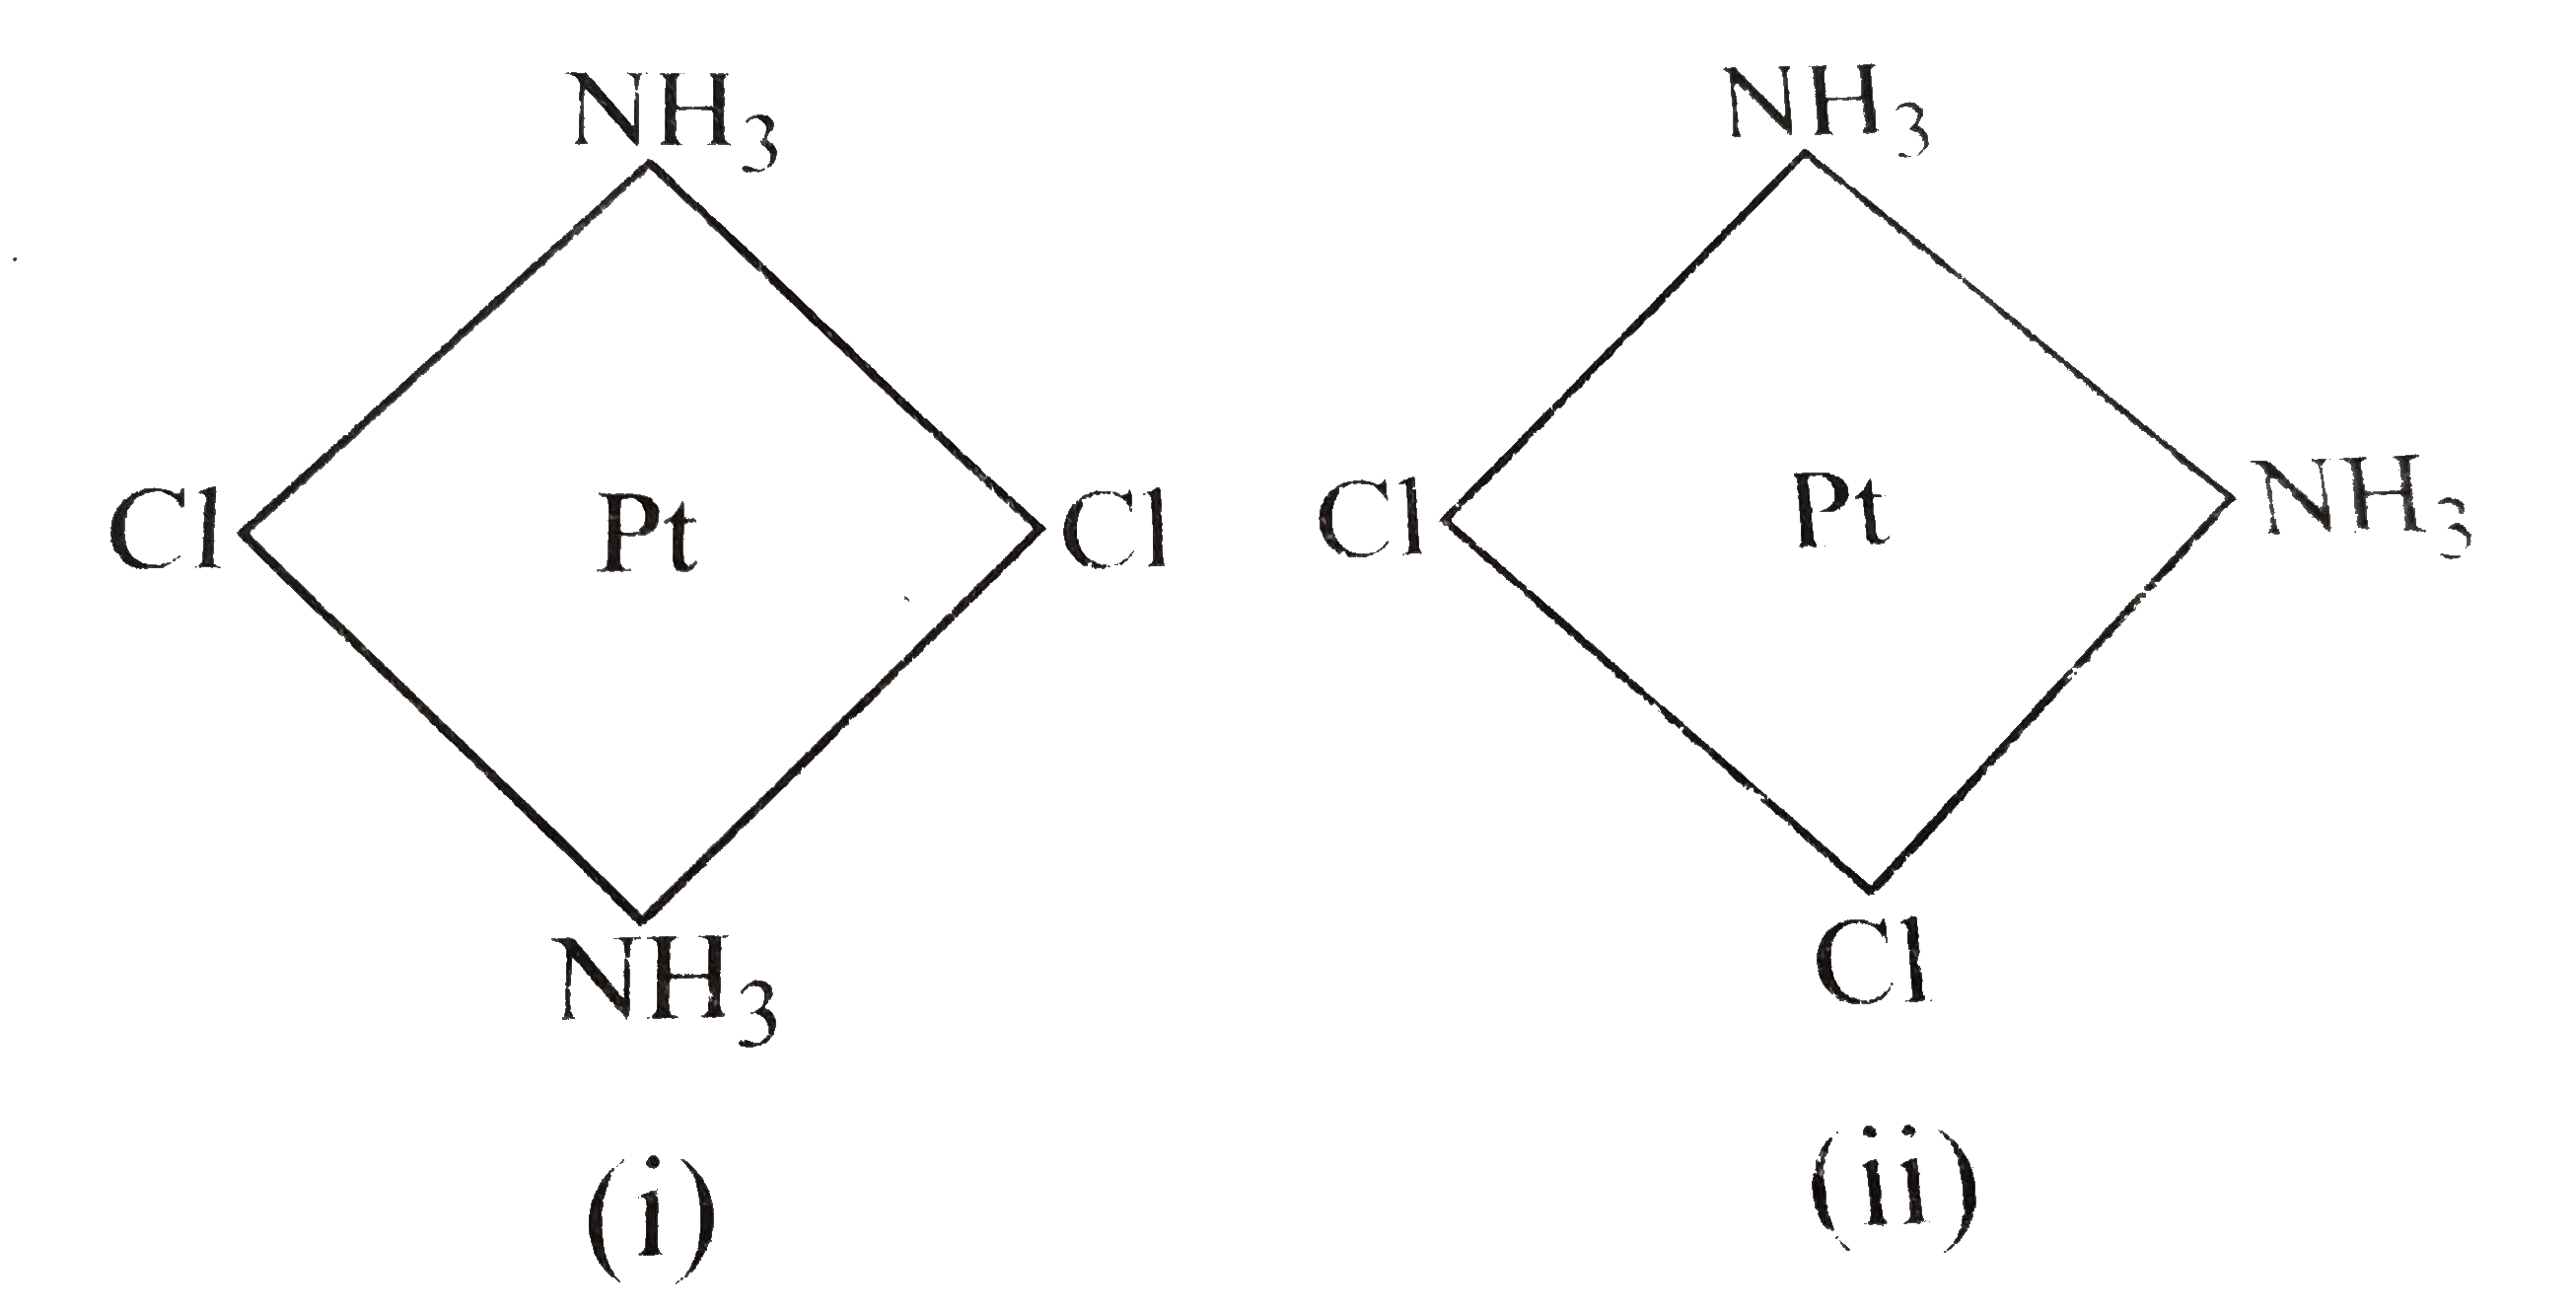 The Pt-CI distance is 2.32 A in several crystaline compounds   What is the CI-CI distance in structure (i) and in structure (ii)    .